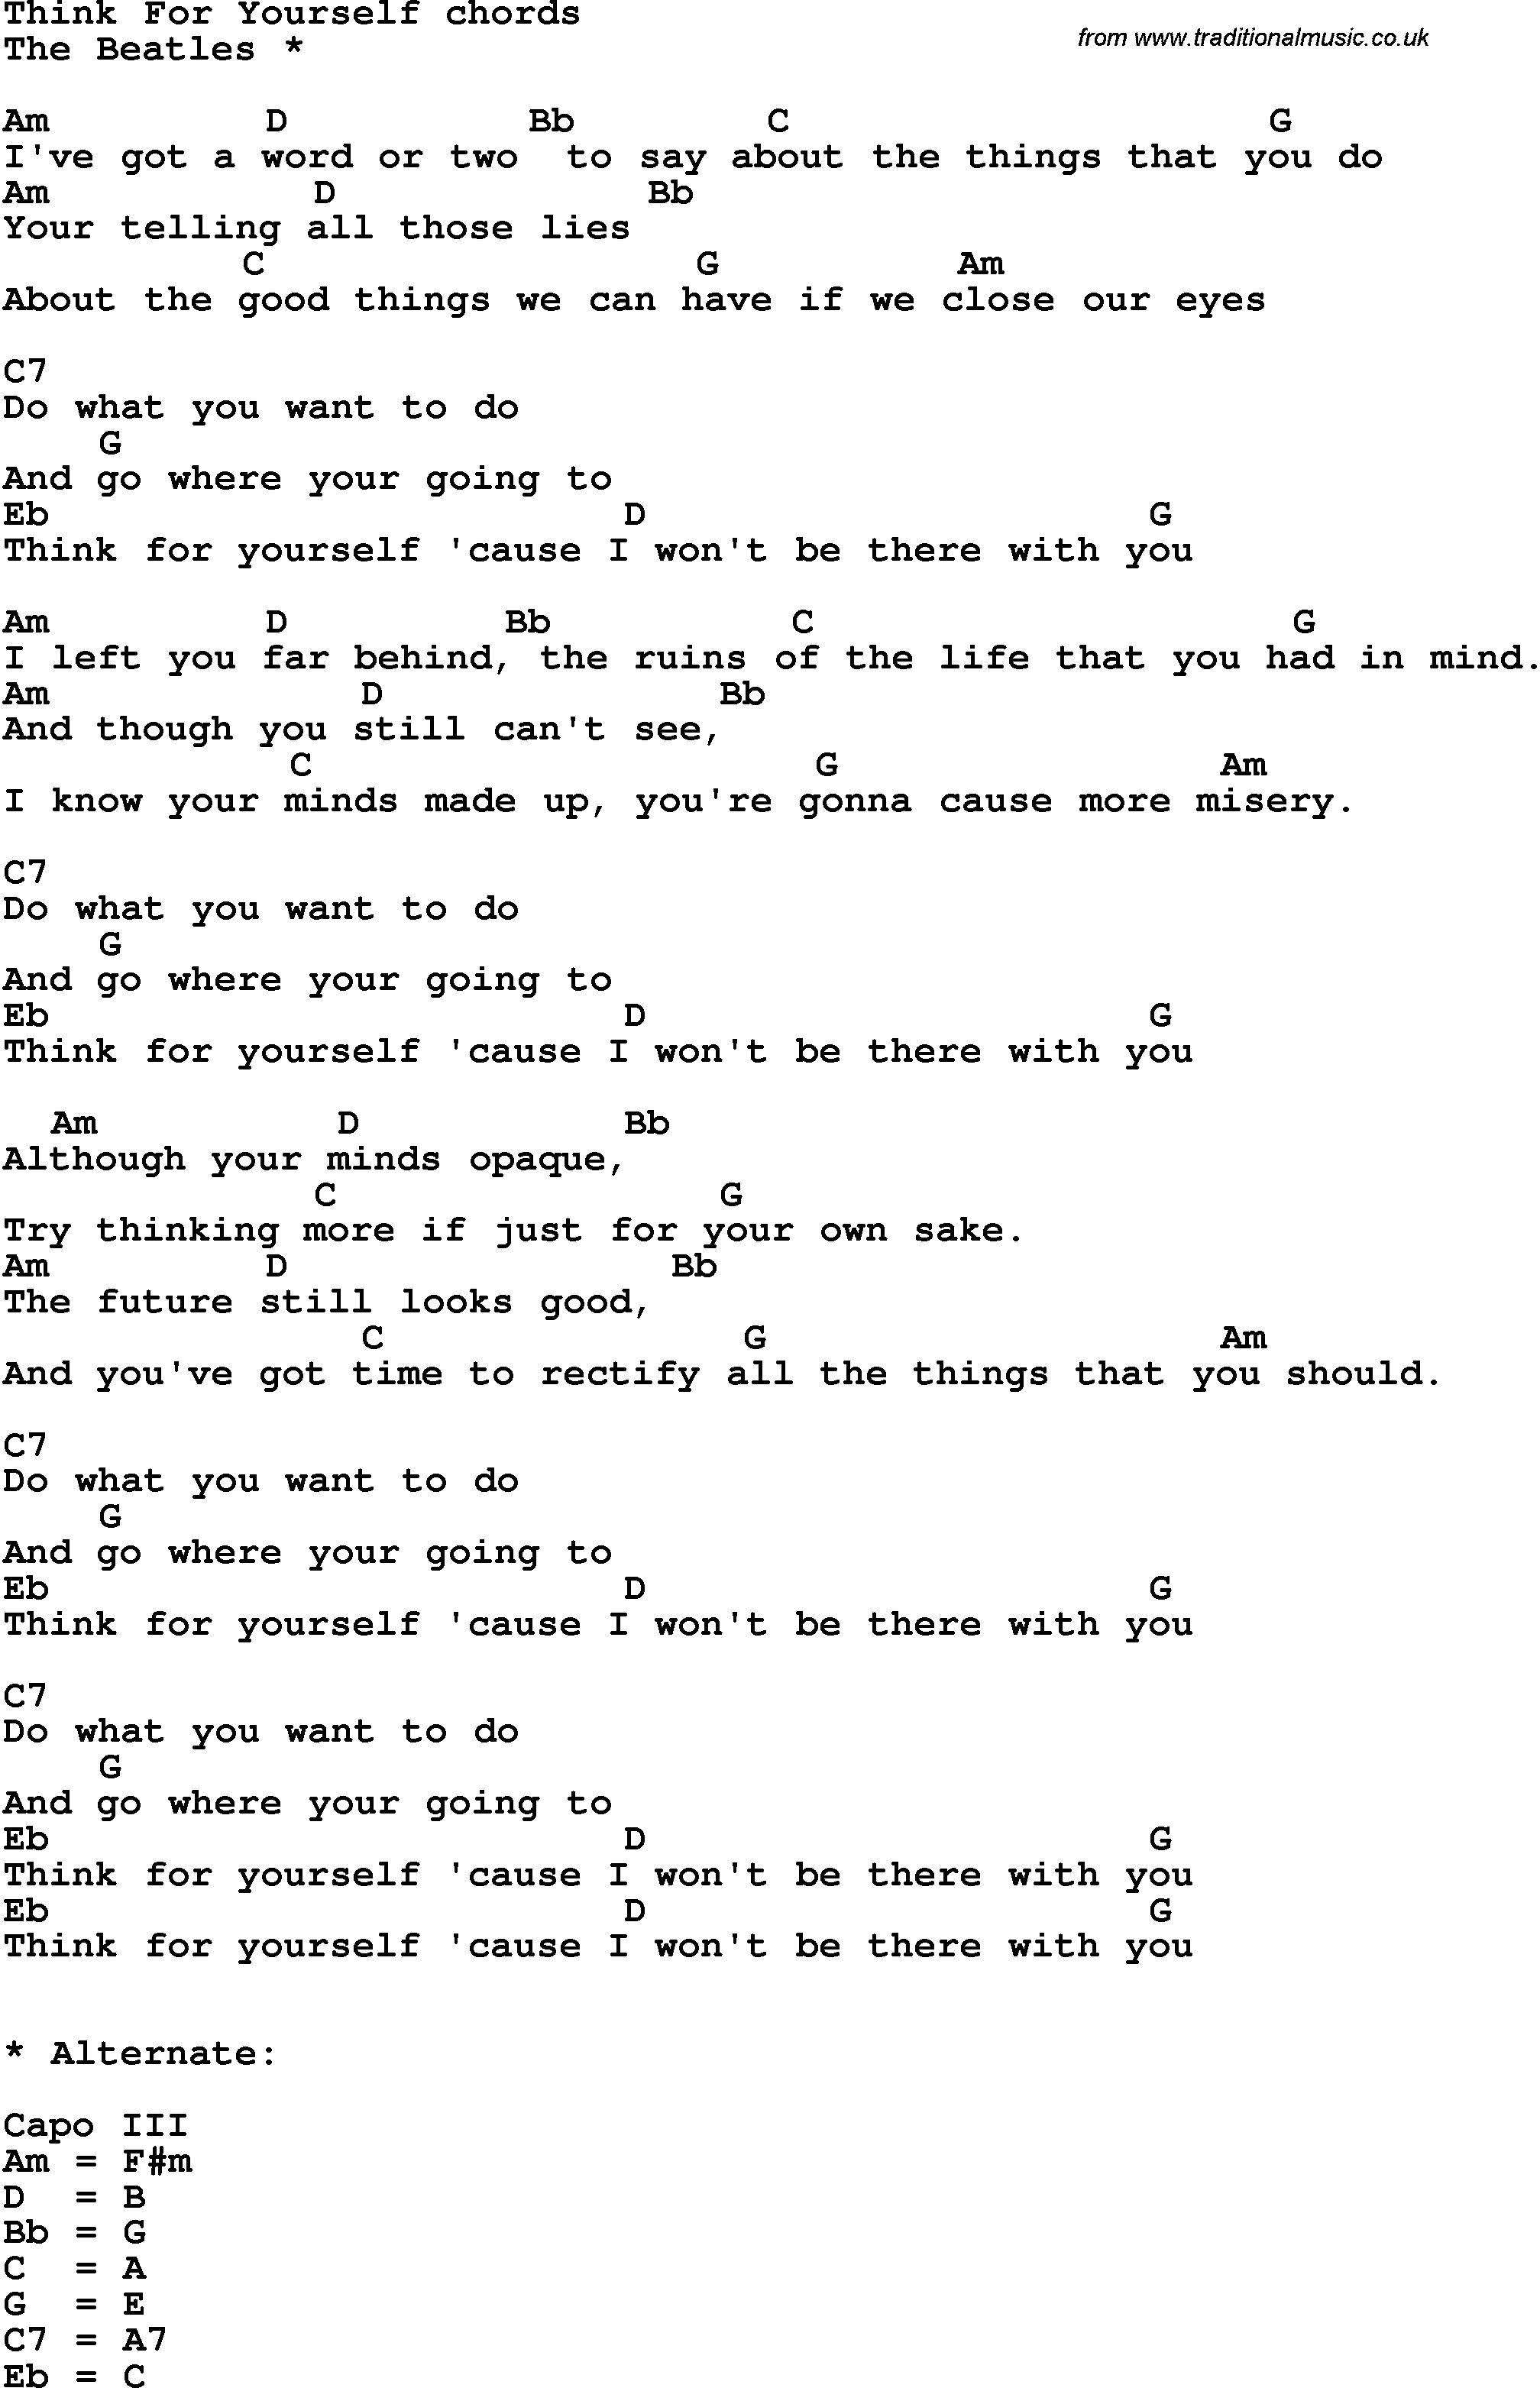 Song Lyrics with guitar chords for Think For Yourself